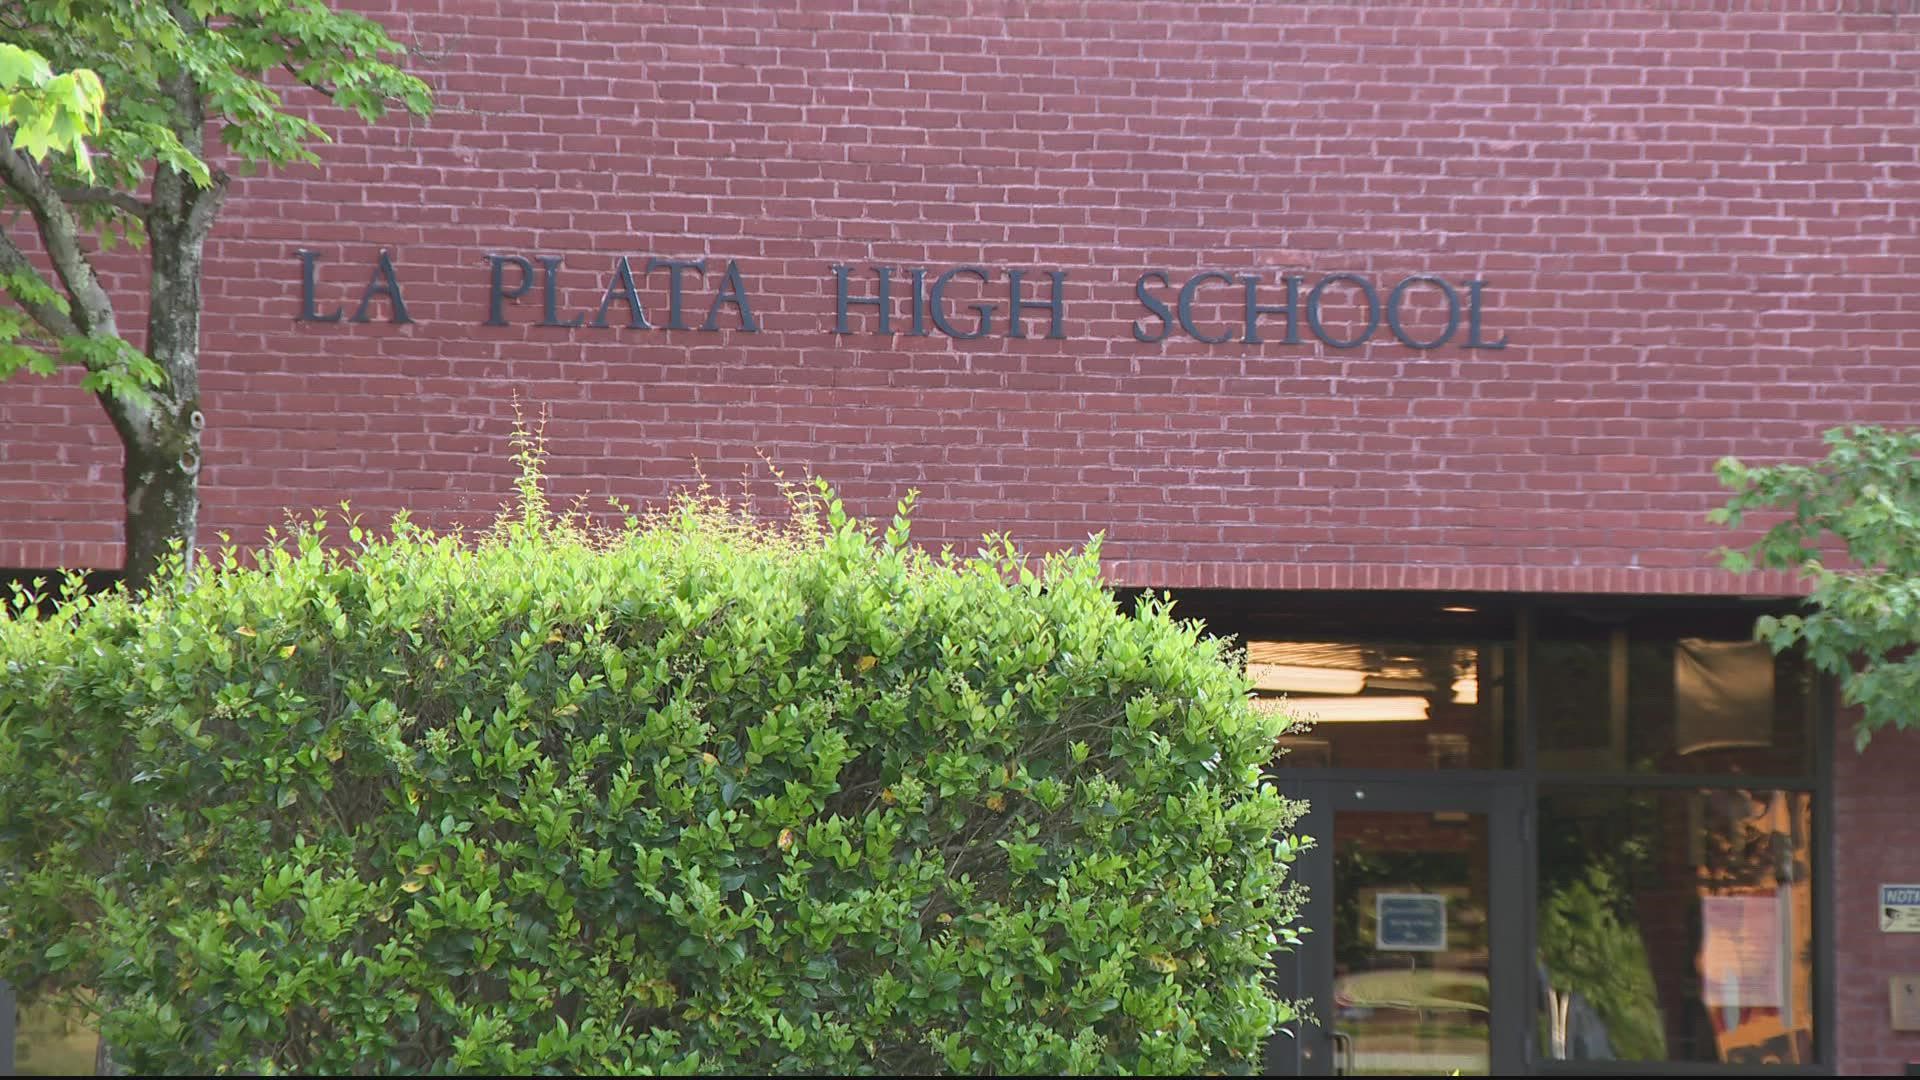 On May 19, a confederate flag was hung on a flag pole at La Plata High school. Students reported it and administrators had it taken down.